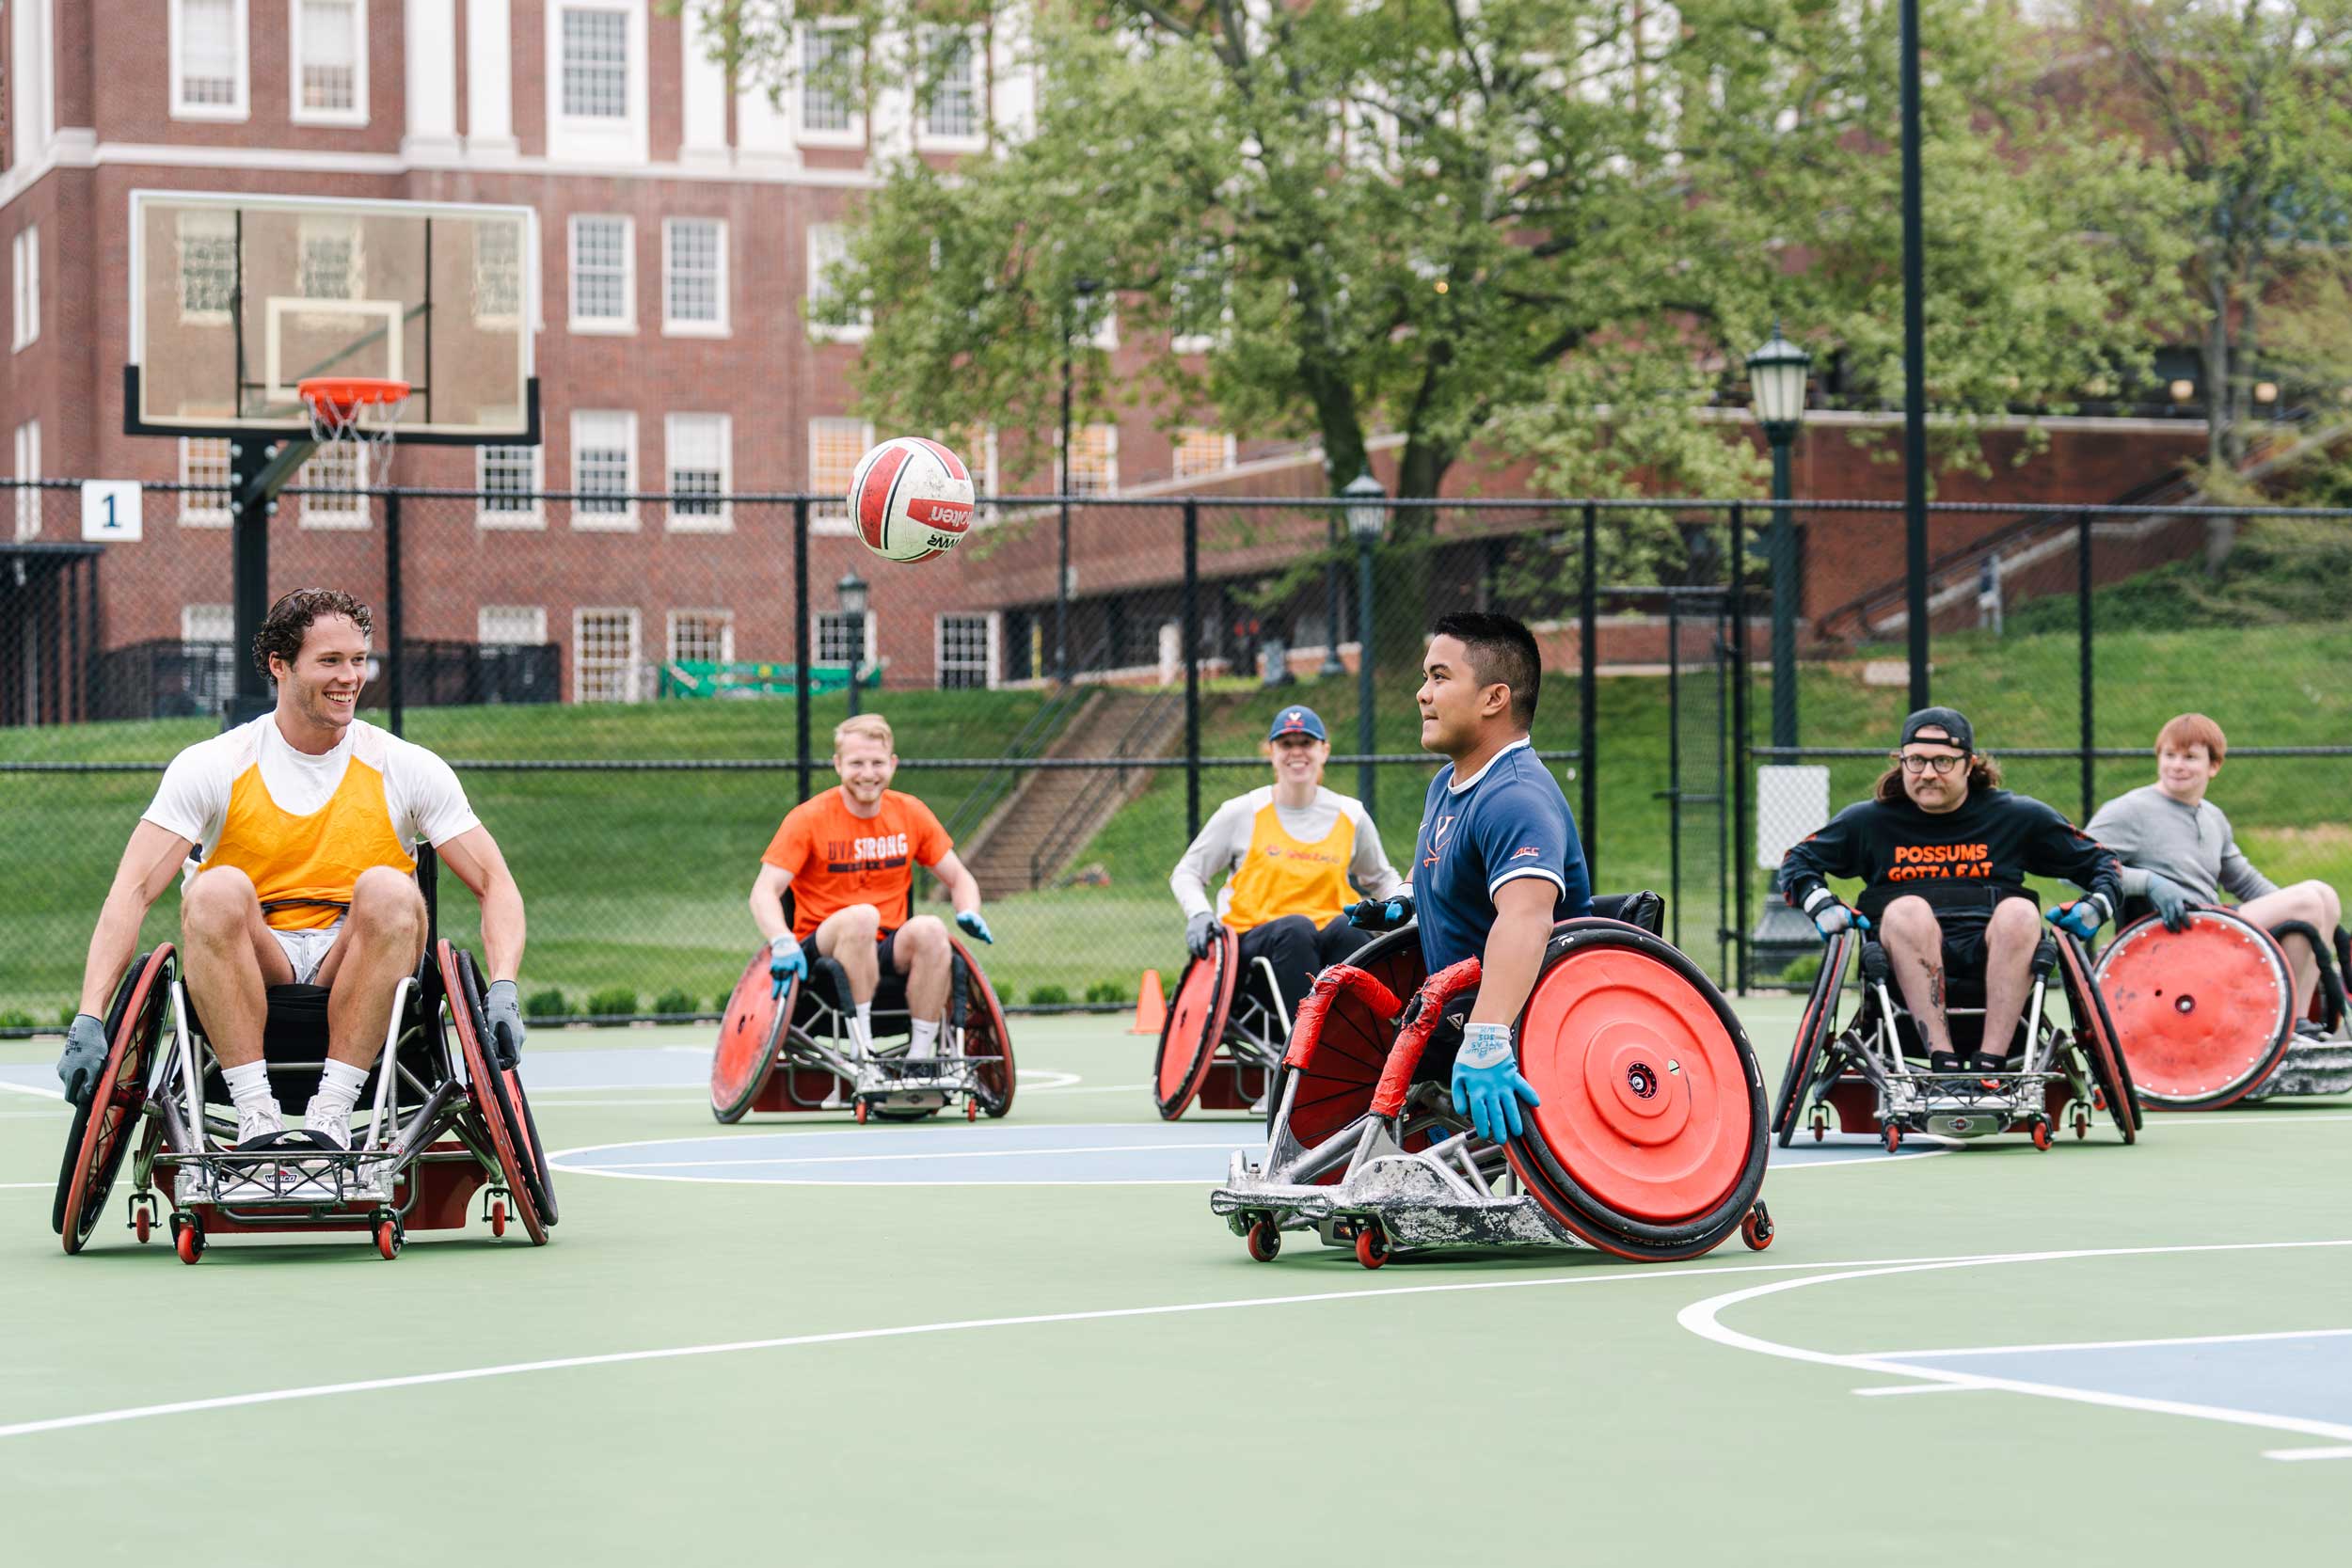 Adaptive Sports Highlighted in Lead-Up to Paralympics Event